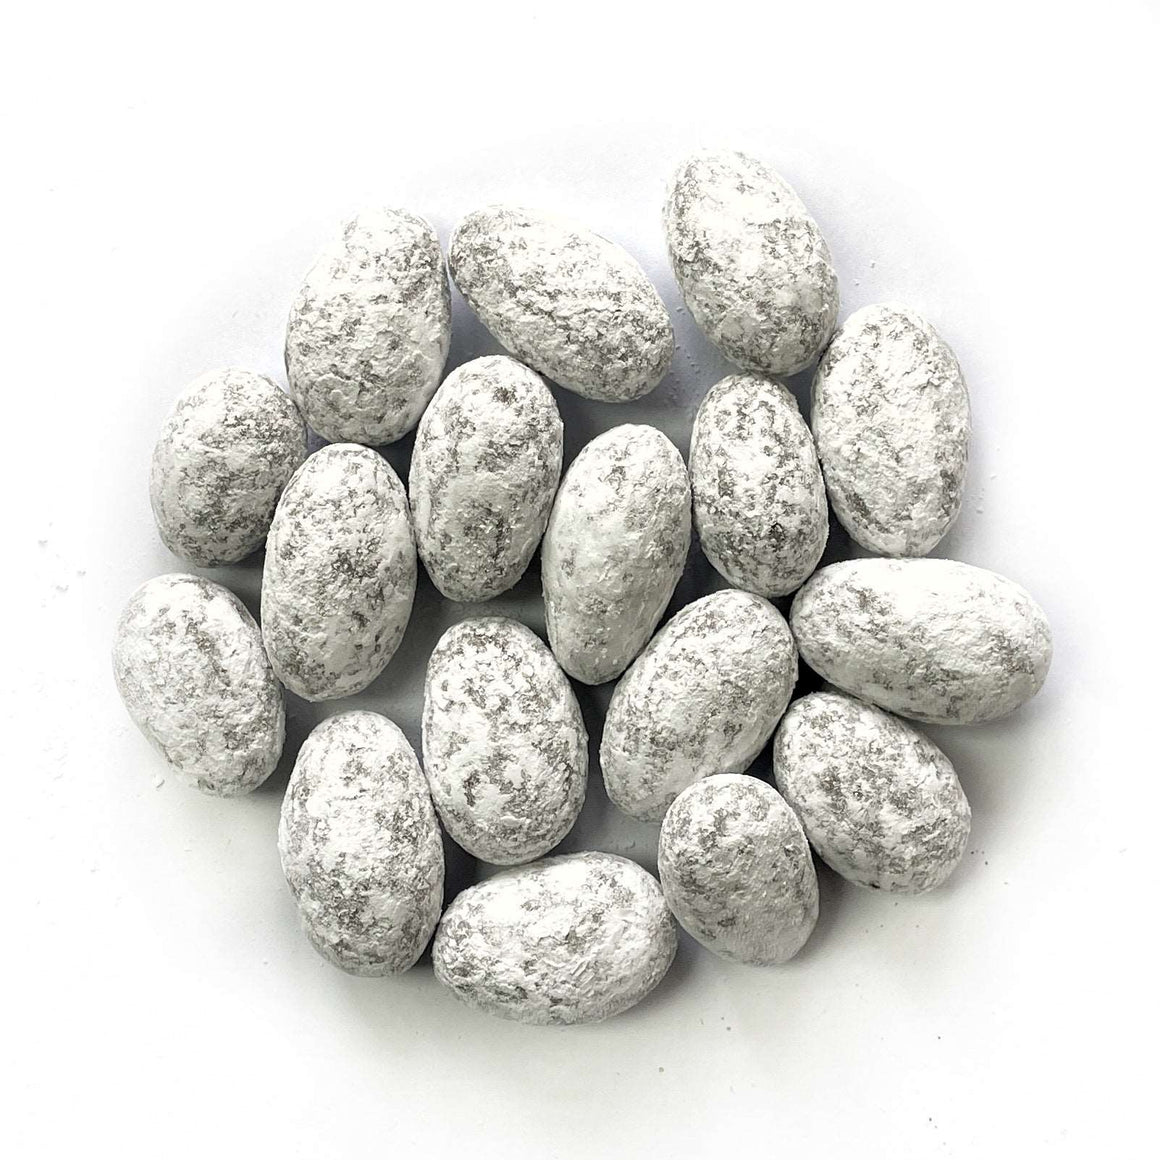 A cluster of Chocolate Cinnamon Snow Almonds, arranged closely together on a white background.